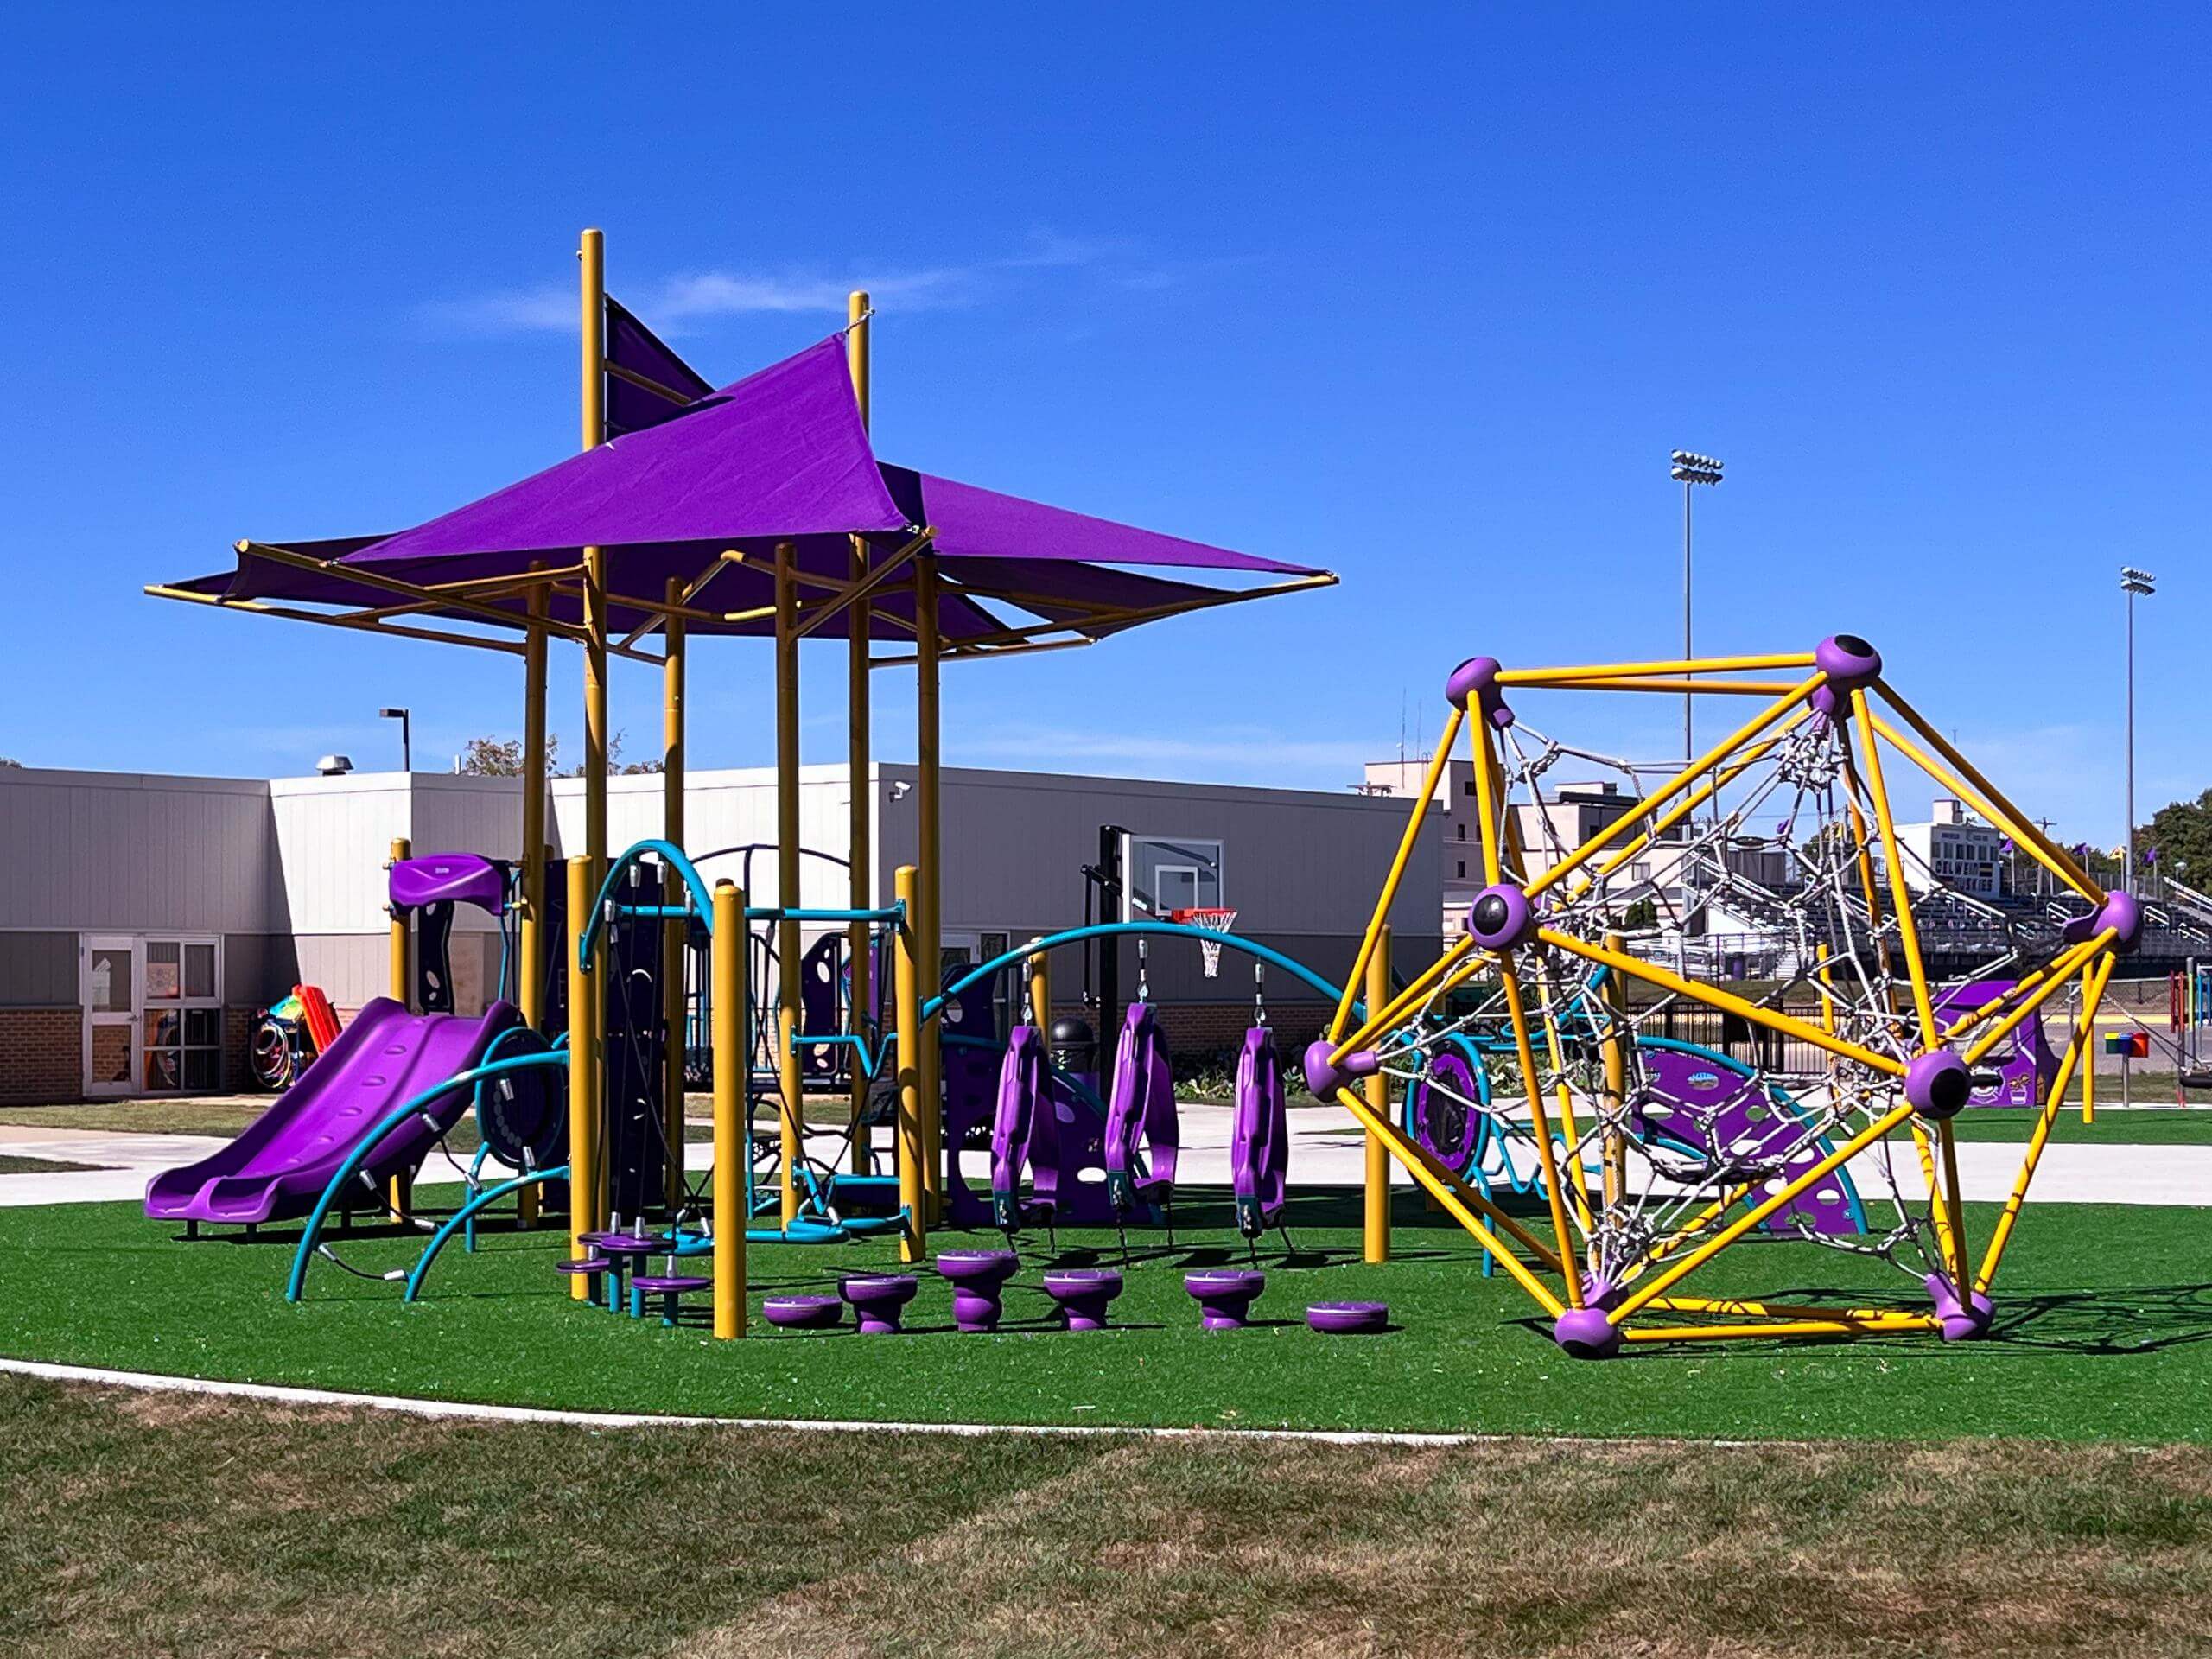 Play area with yellow climbing dome, purple slides, and shaded platforms on synthetic turf.